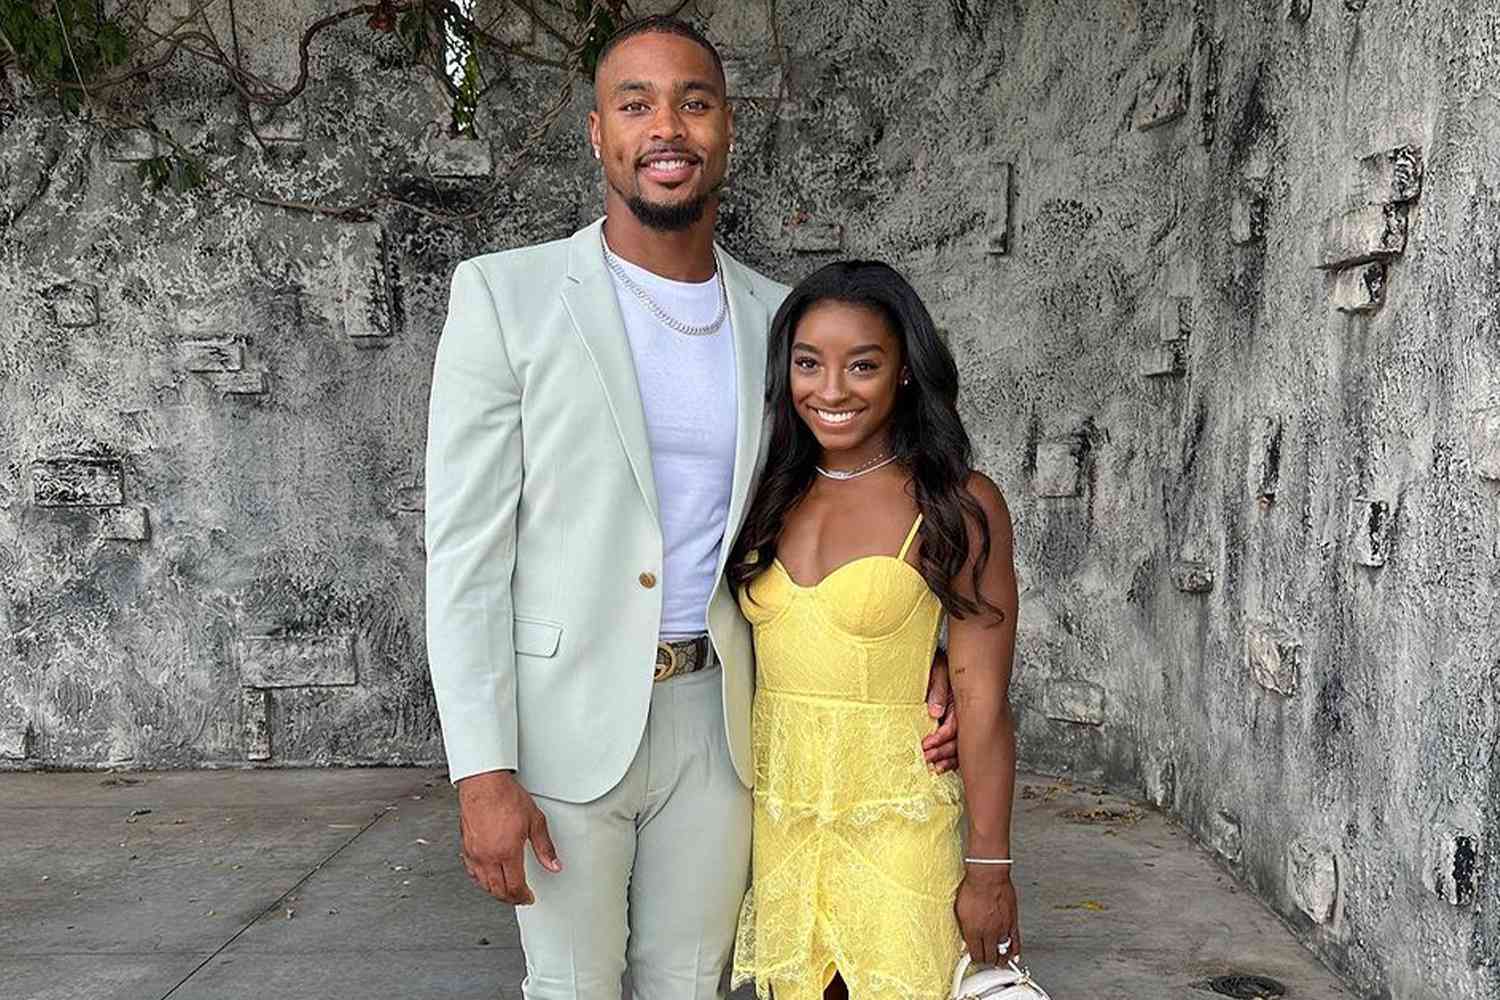 Simone Biles and Jonathan Owens Latest News: A Love Story That Will Leave You Inspired! 12